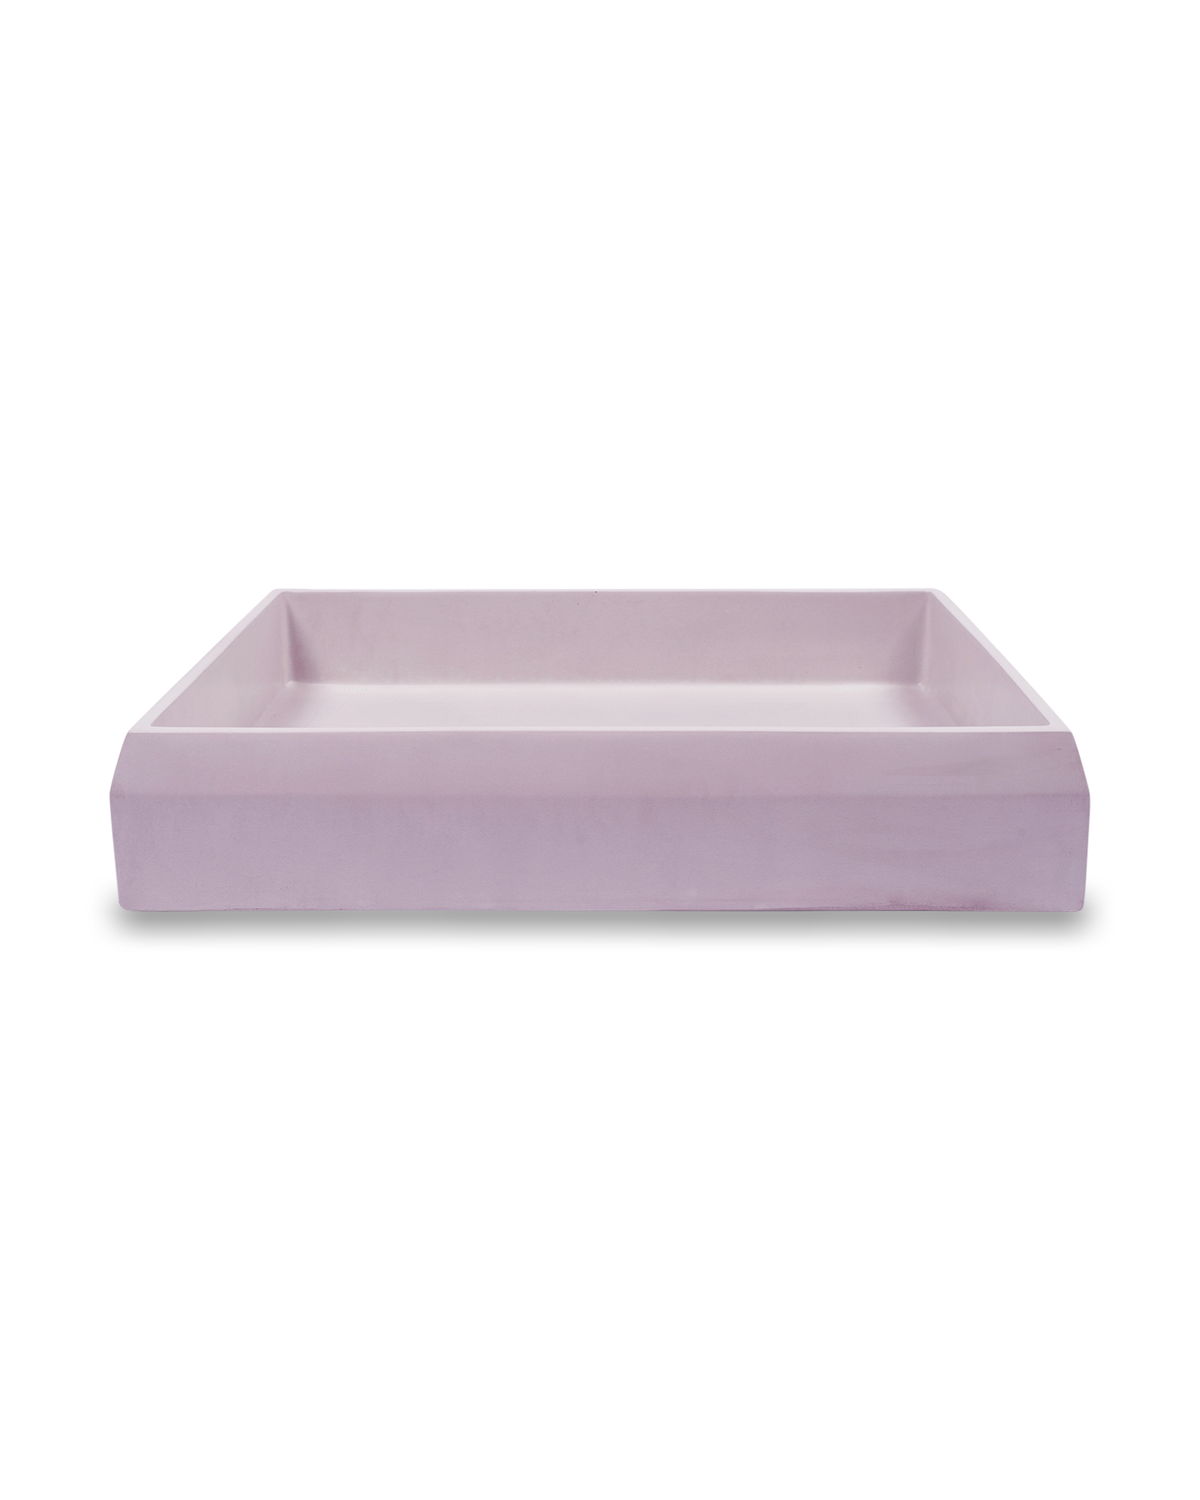 Prism Rectangle Basin - Surface Mount (Lilac)